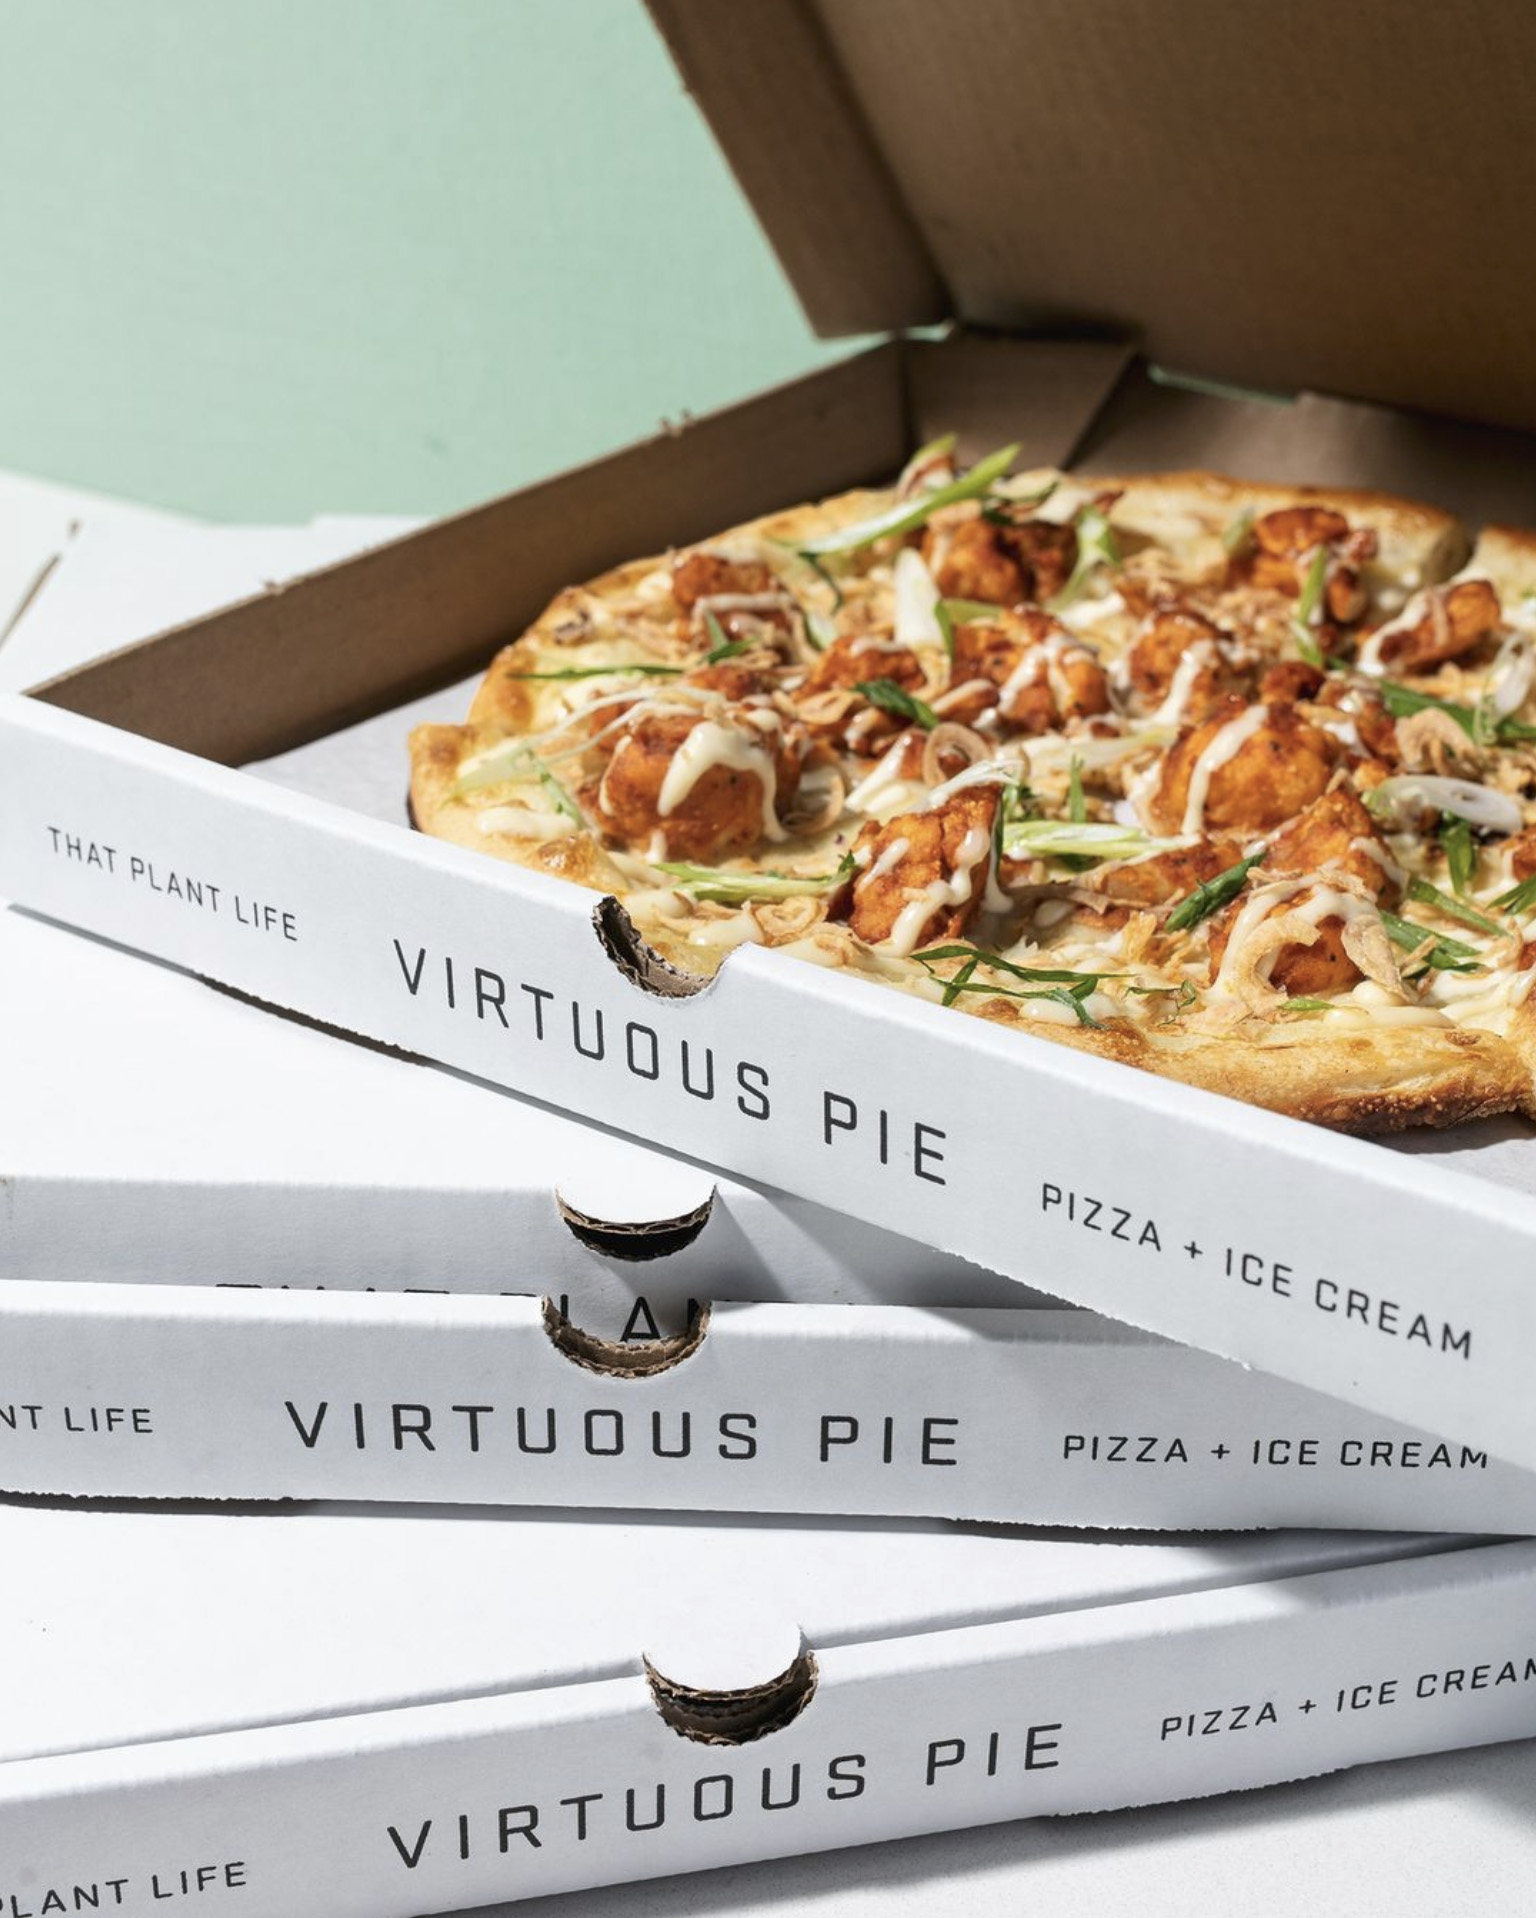 A photo of the Virtuous Pie Stranger Wings vegan buffalo cauliflower pie in a pizza box stacked on top of more pizza boxes against a light green background.